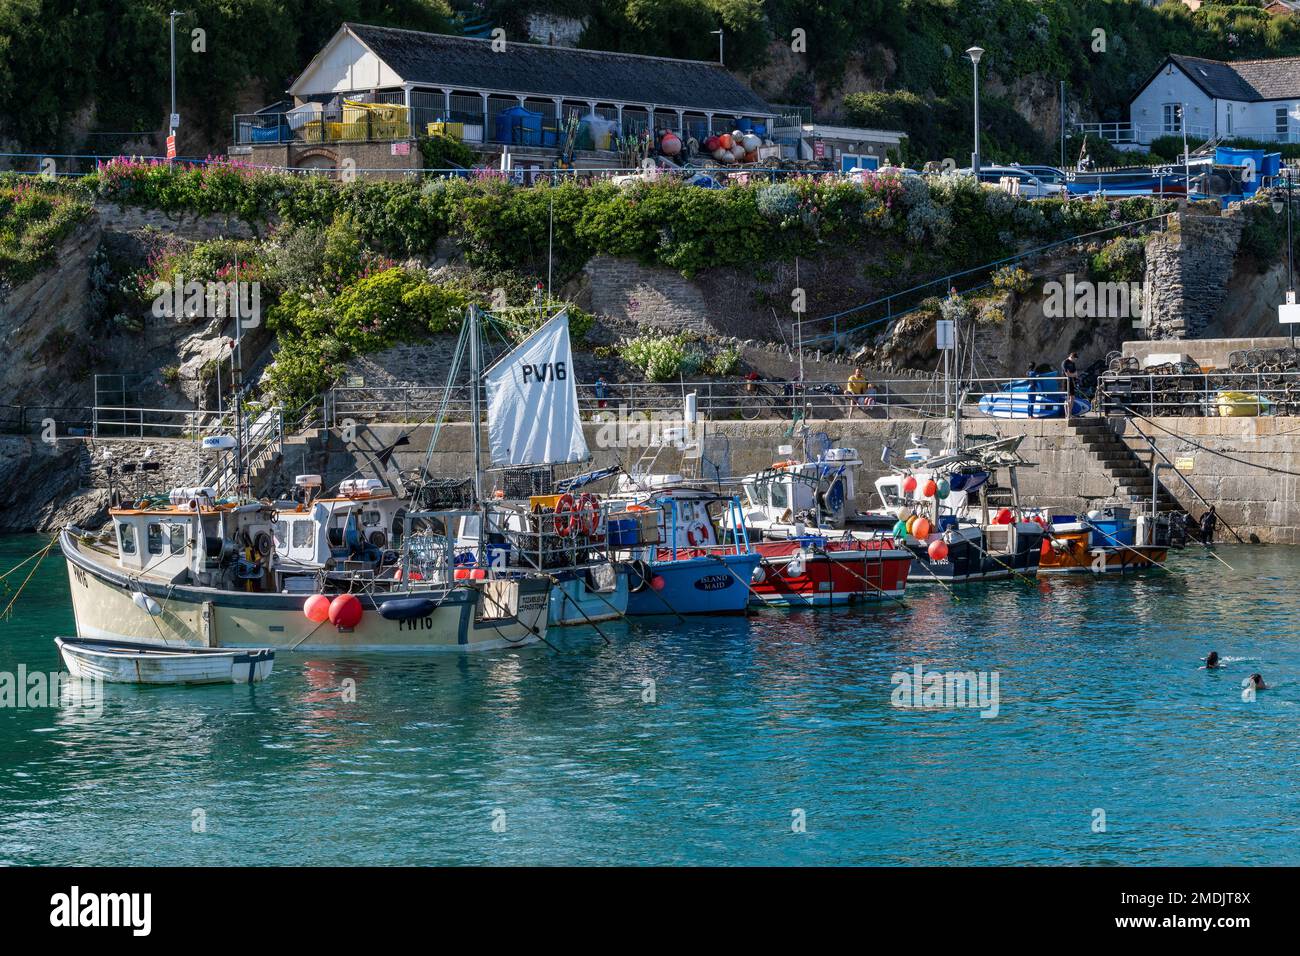 Fishing boats moored in the picturesque Newquay Harbour in Cornwall in the UK. Stock Photo